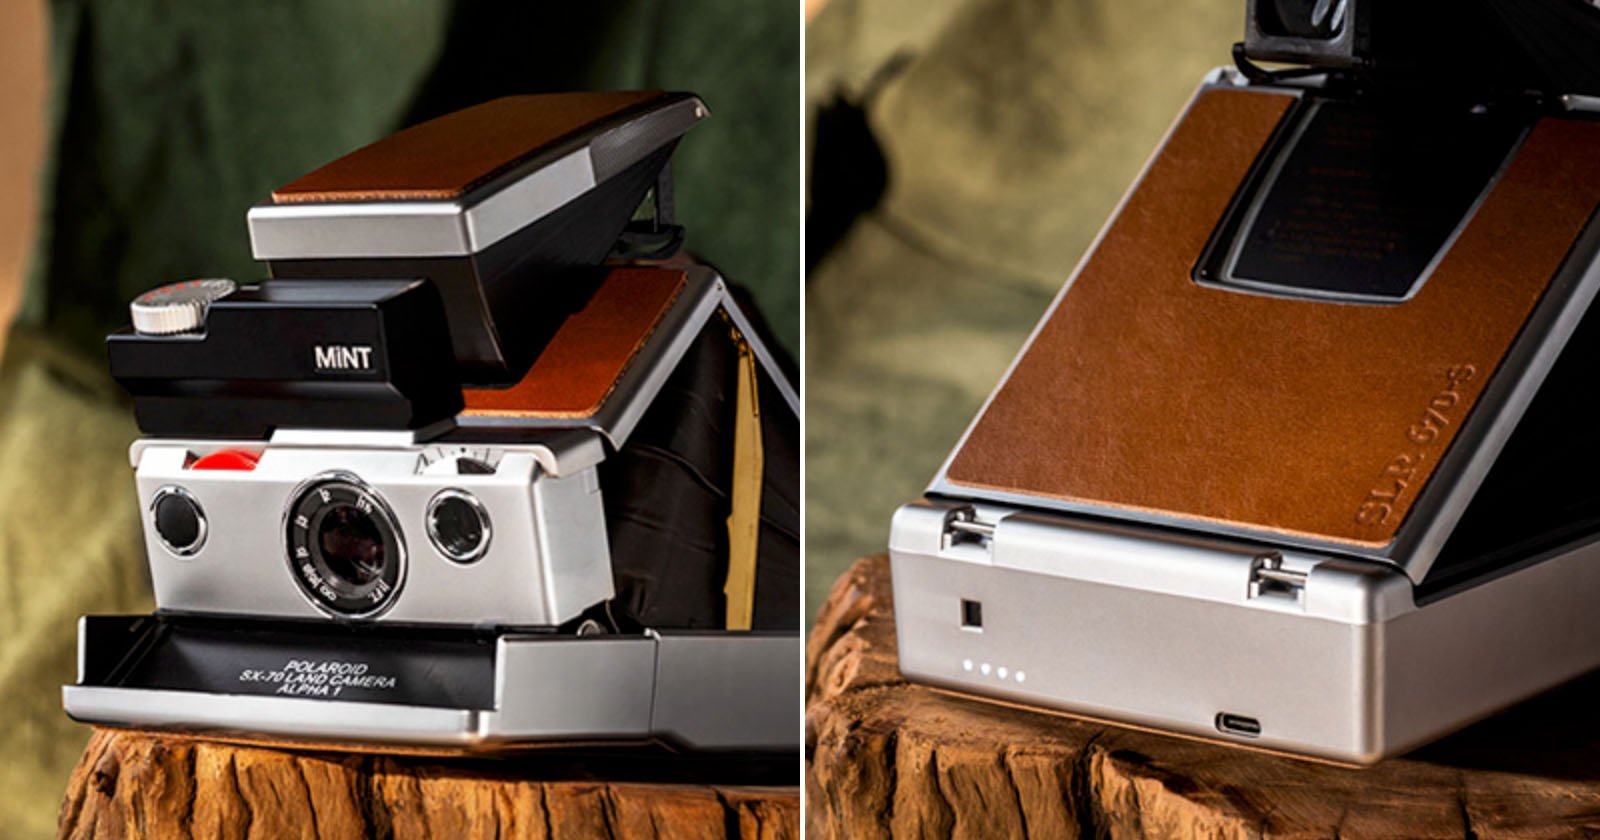 MiNT SLR670 (Type i) Offers Vintage Polaroid Style with Modern Innovation